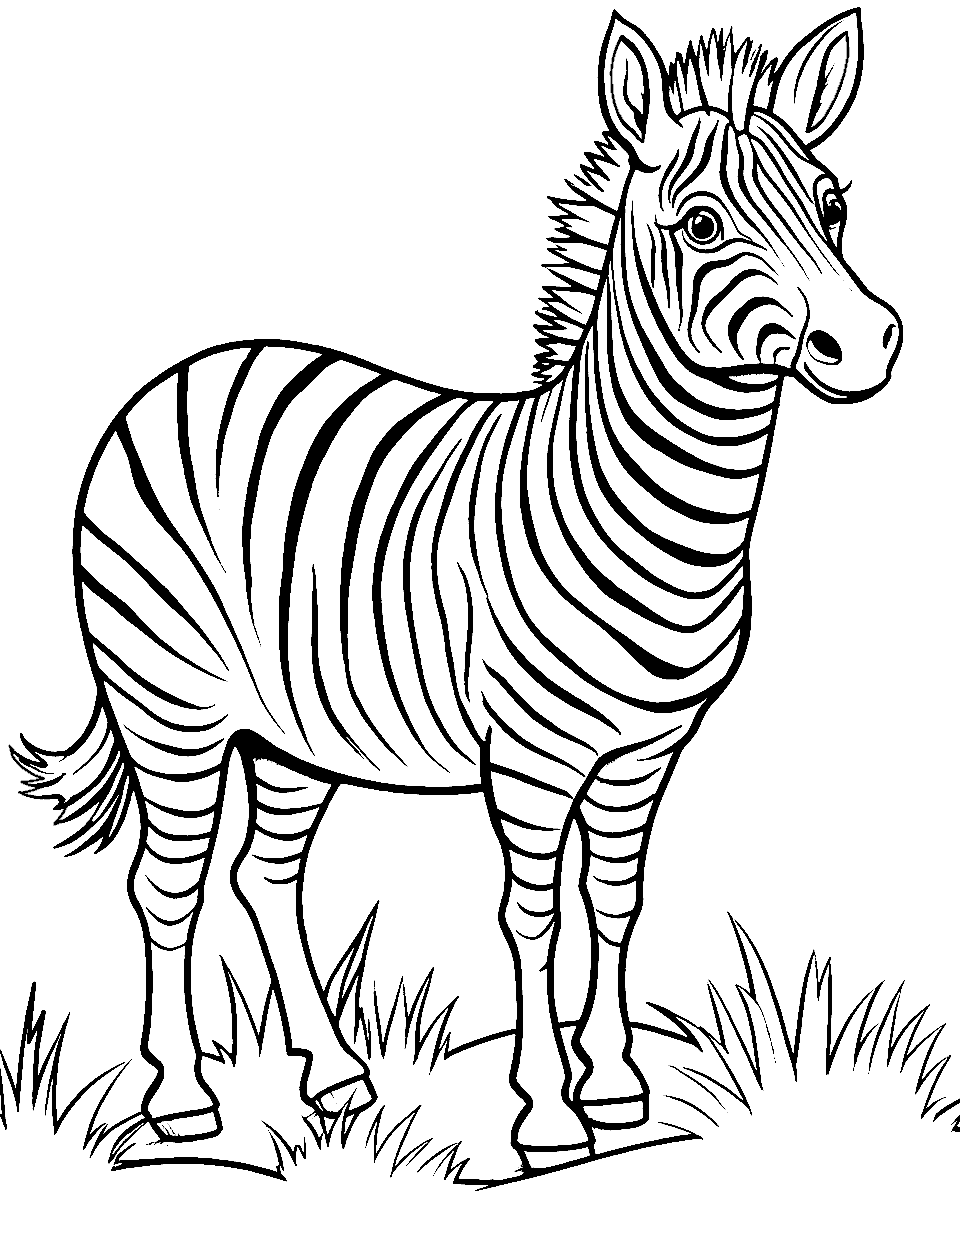 Preschool coloring pages free printable sheets